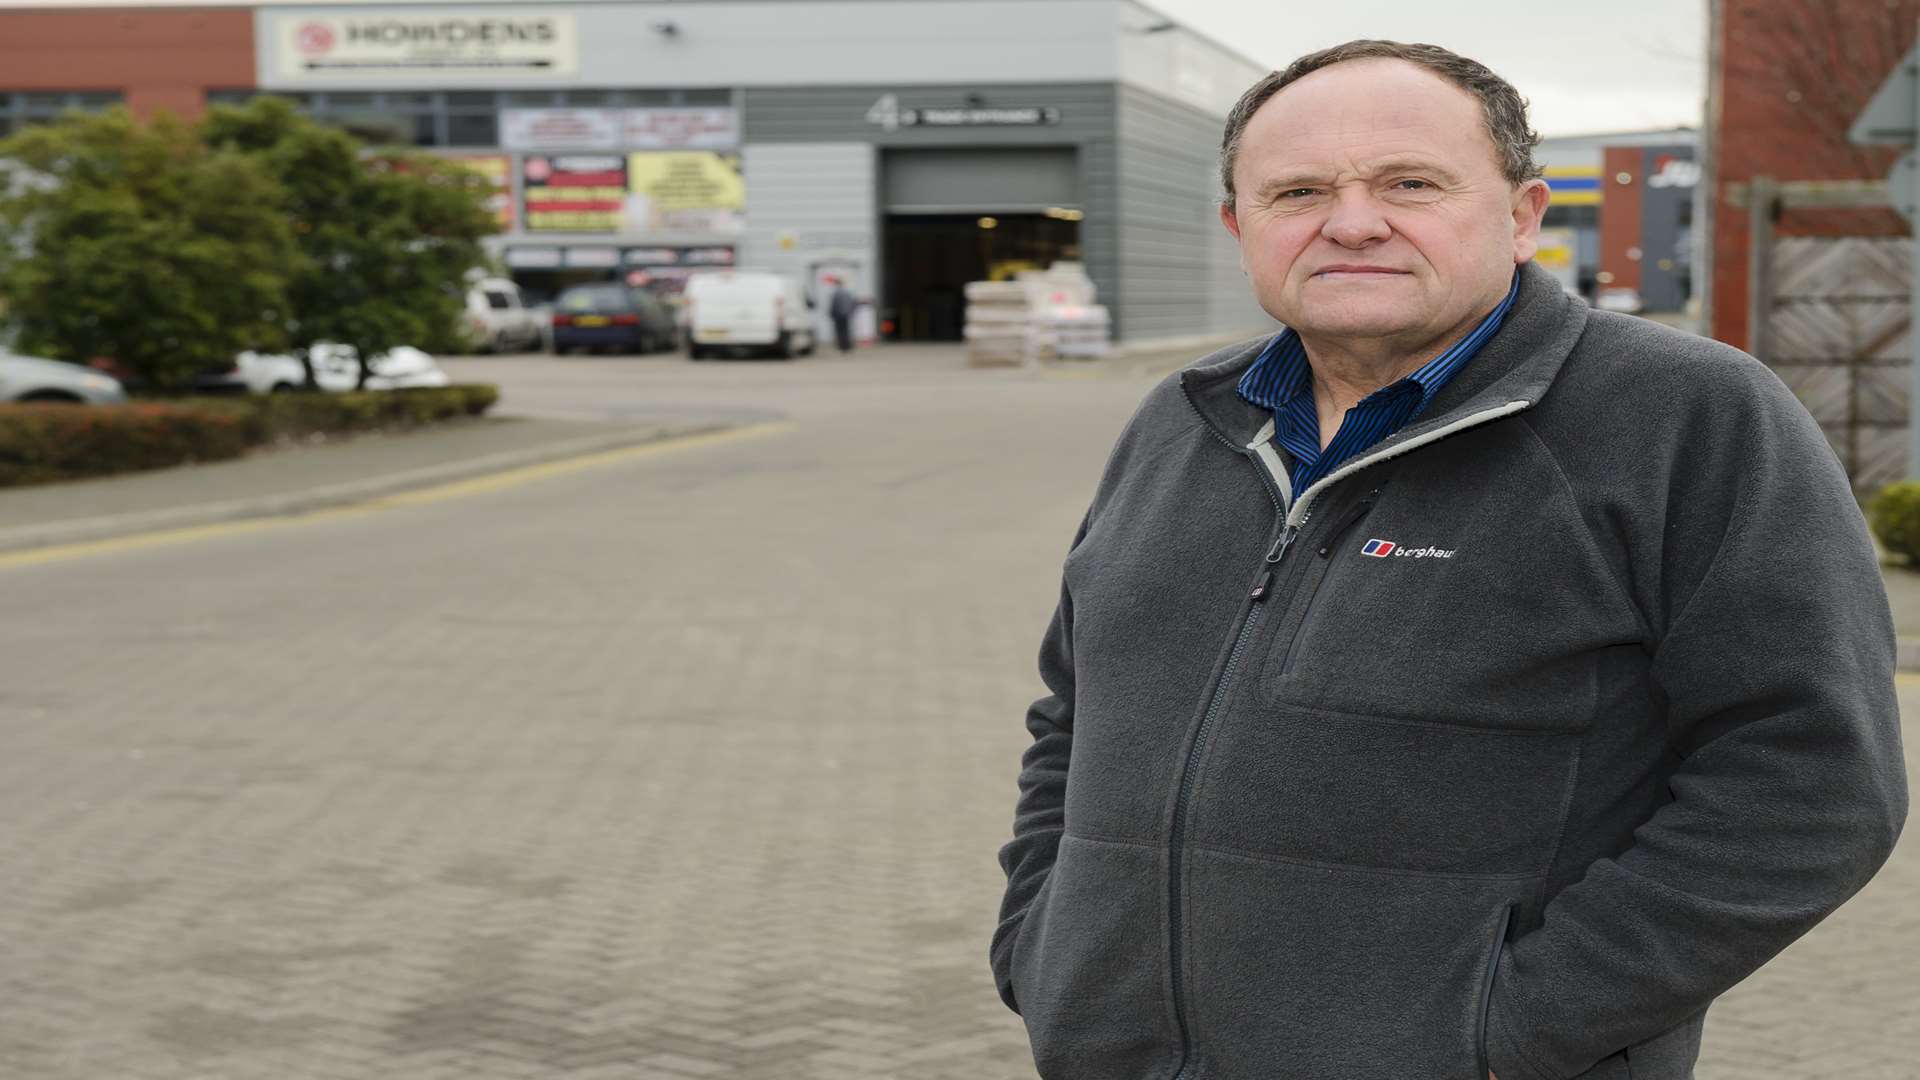 Cllr Peter Harman is growing increasingly concerned by the activities of drivers on the industrial estate